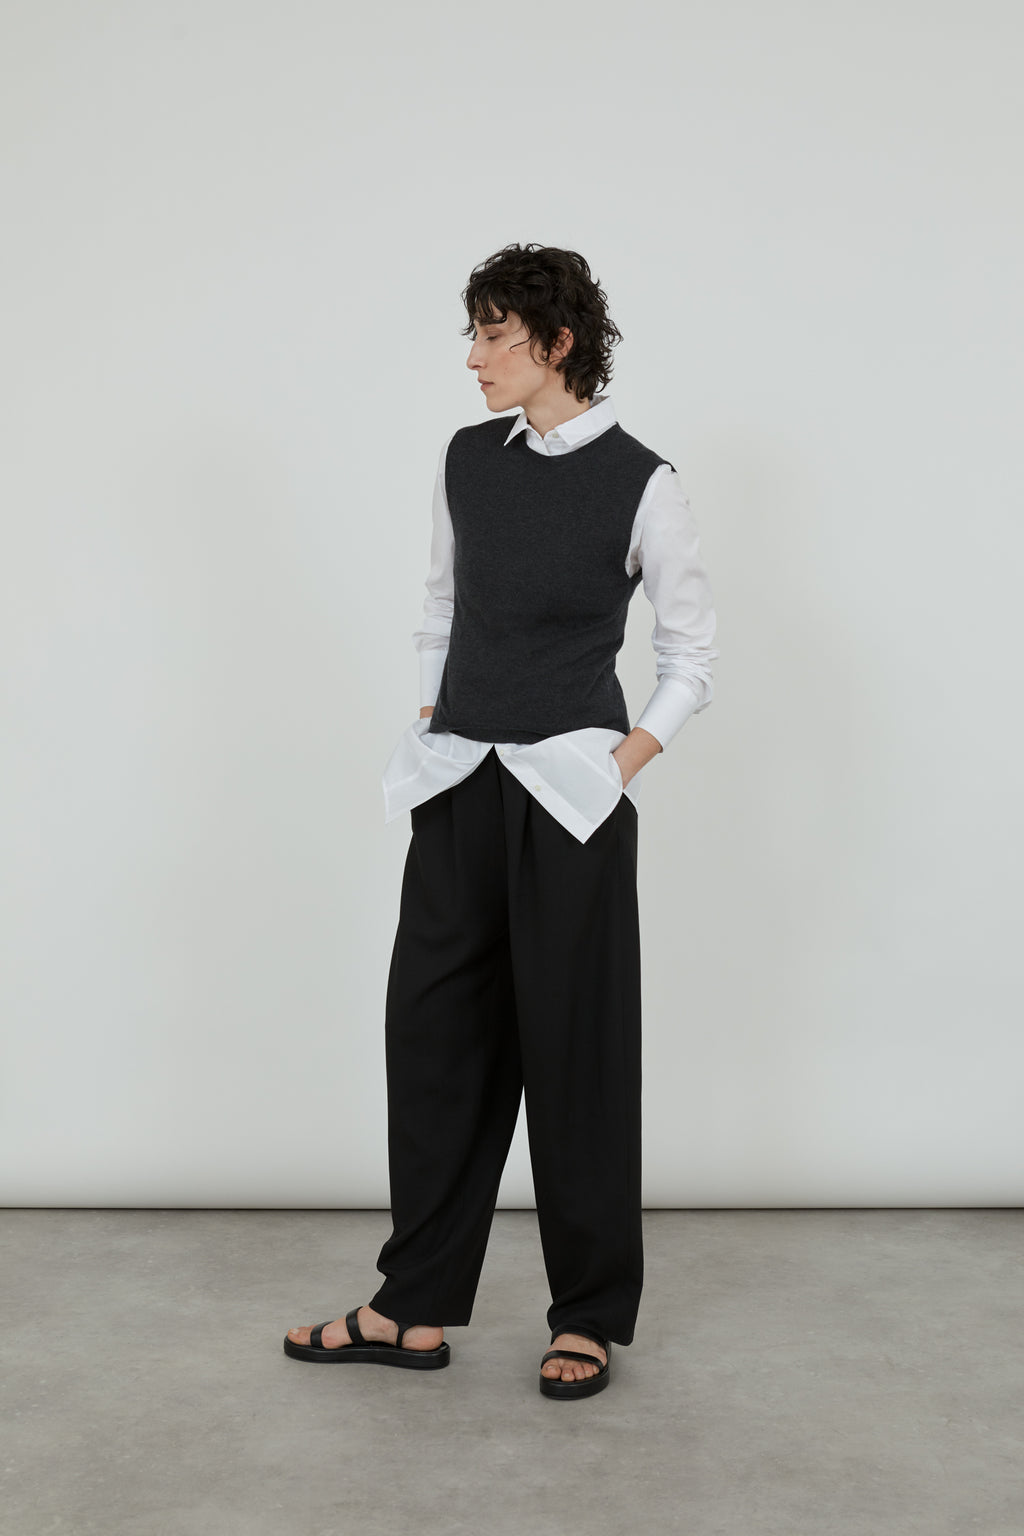 Emma knitted top in dark grey over a white classic shirt and black pants.